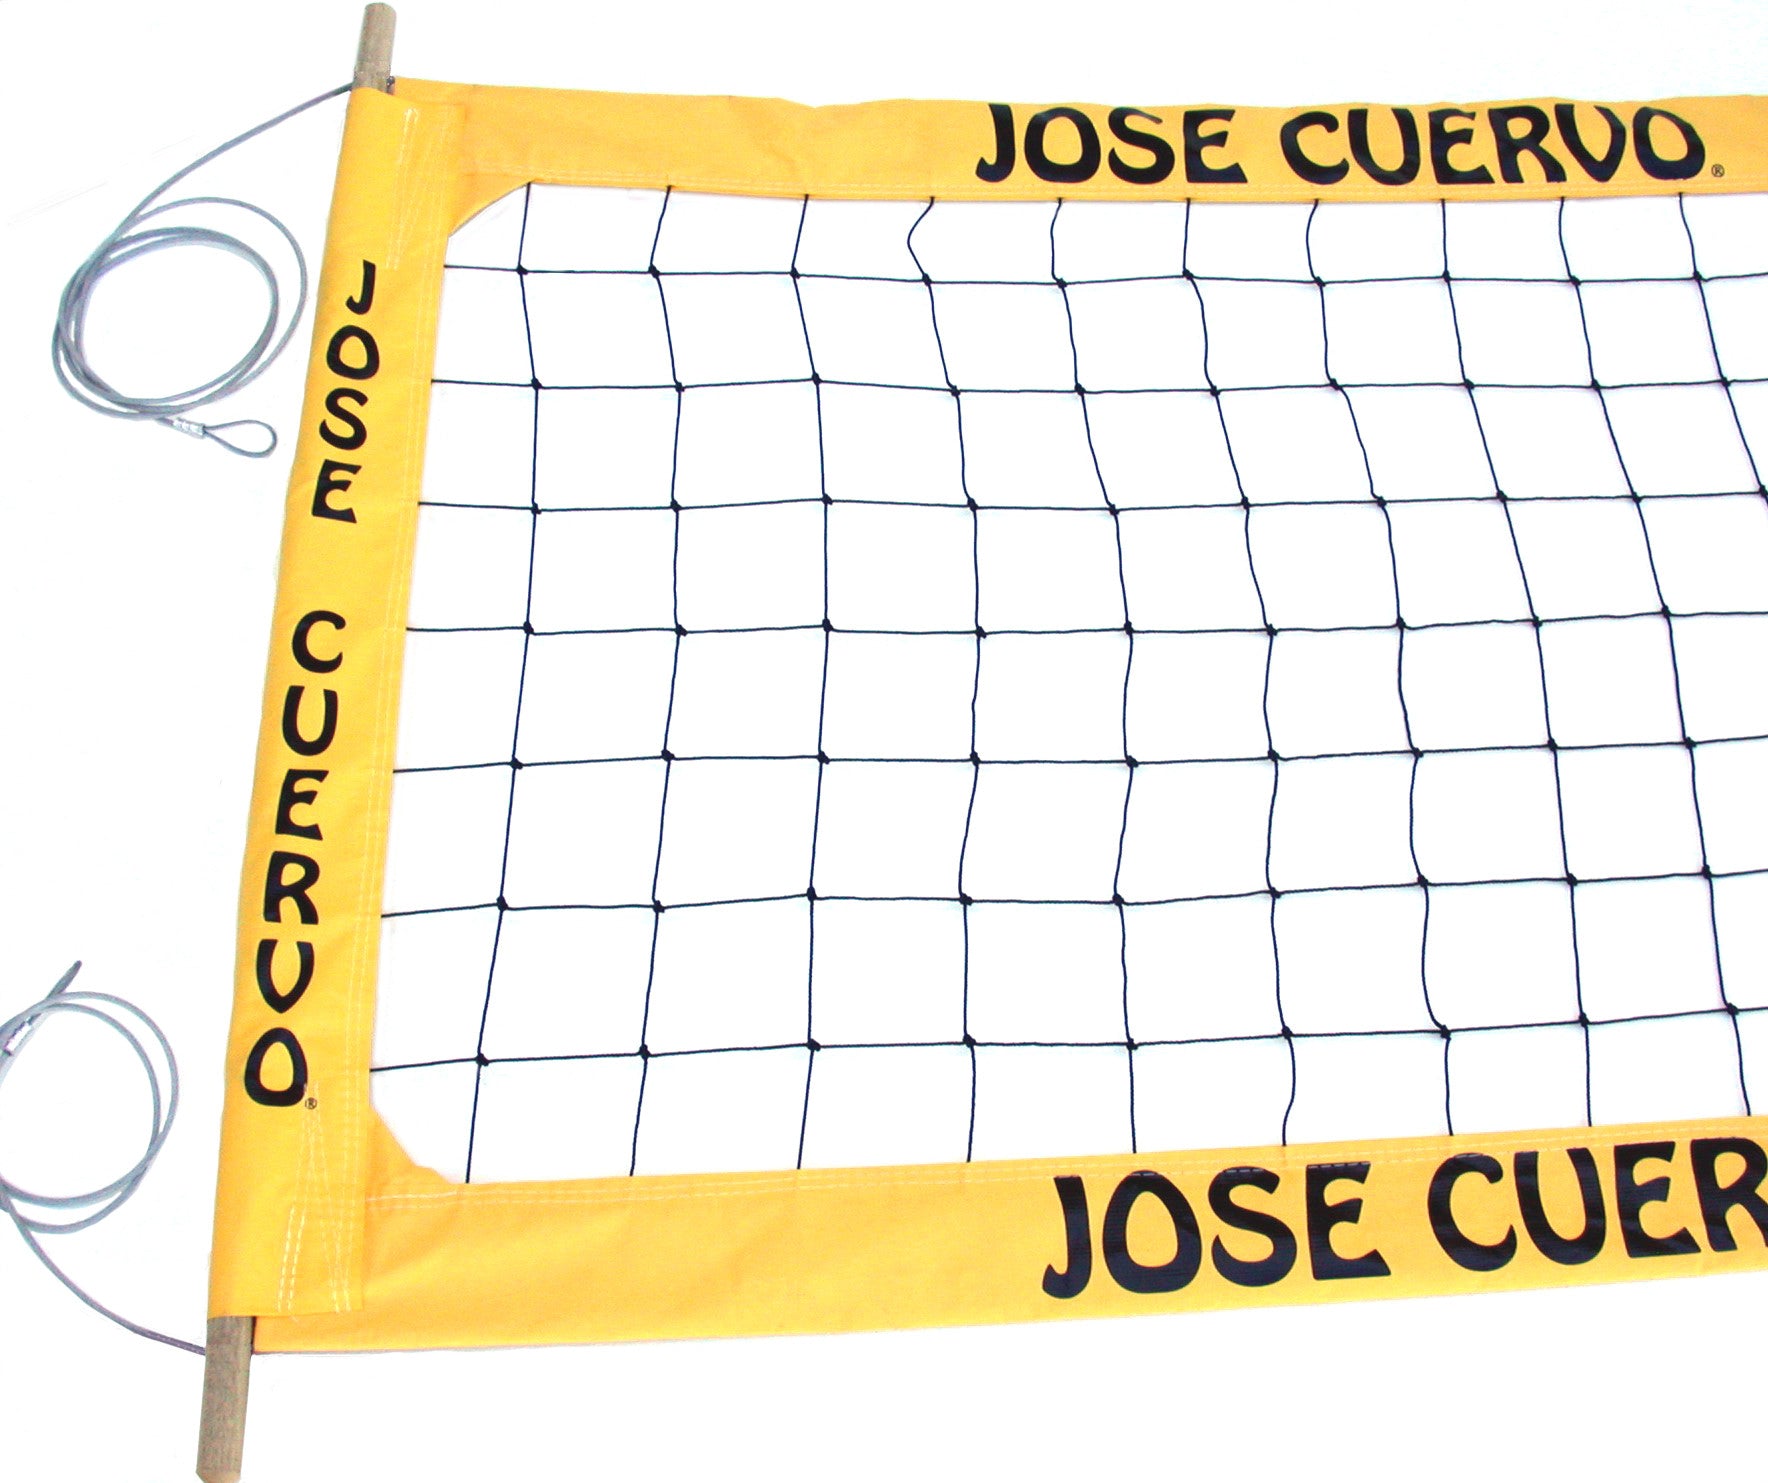 JCPRO-Jose Cuevo Professional Volleyball  Net, Aircraft Cable Top and Bottom, 4-inch Yellow Tapes